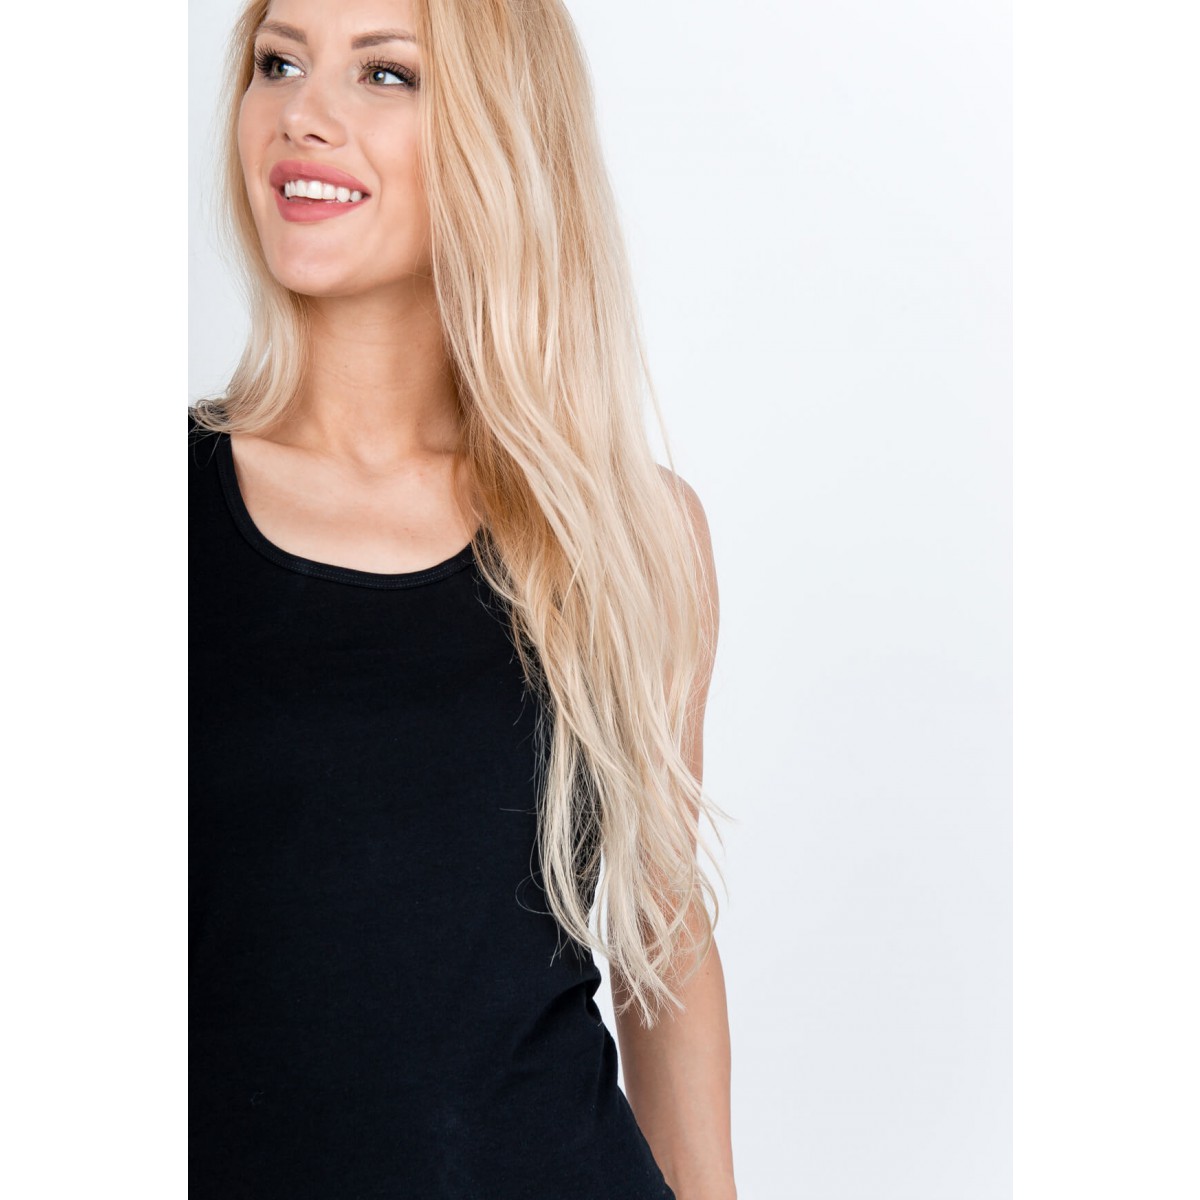 Women's tank top with cut-out on the back - black,